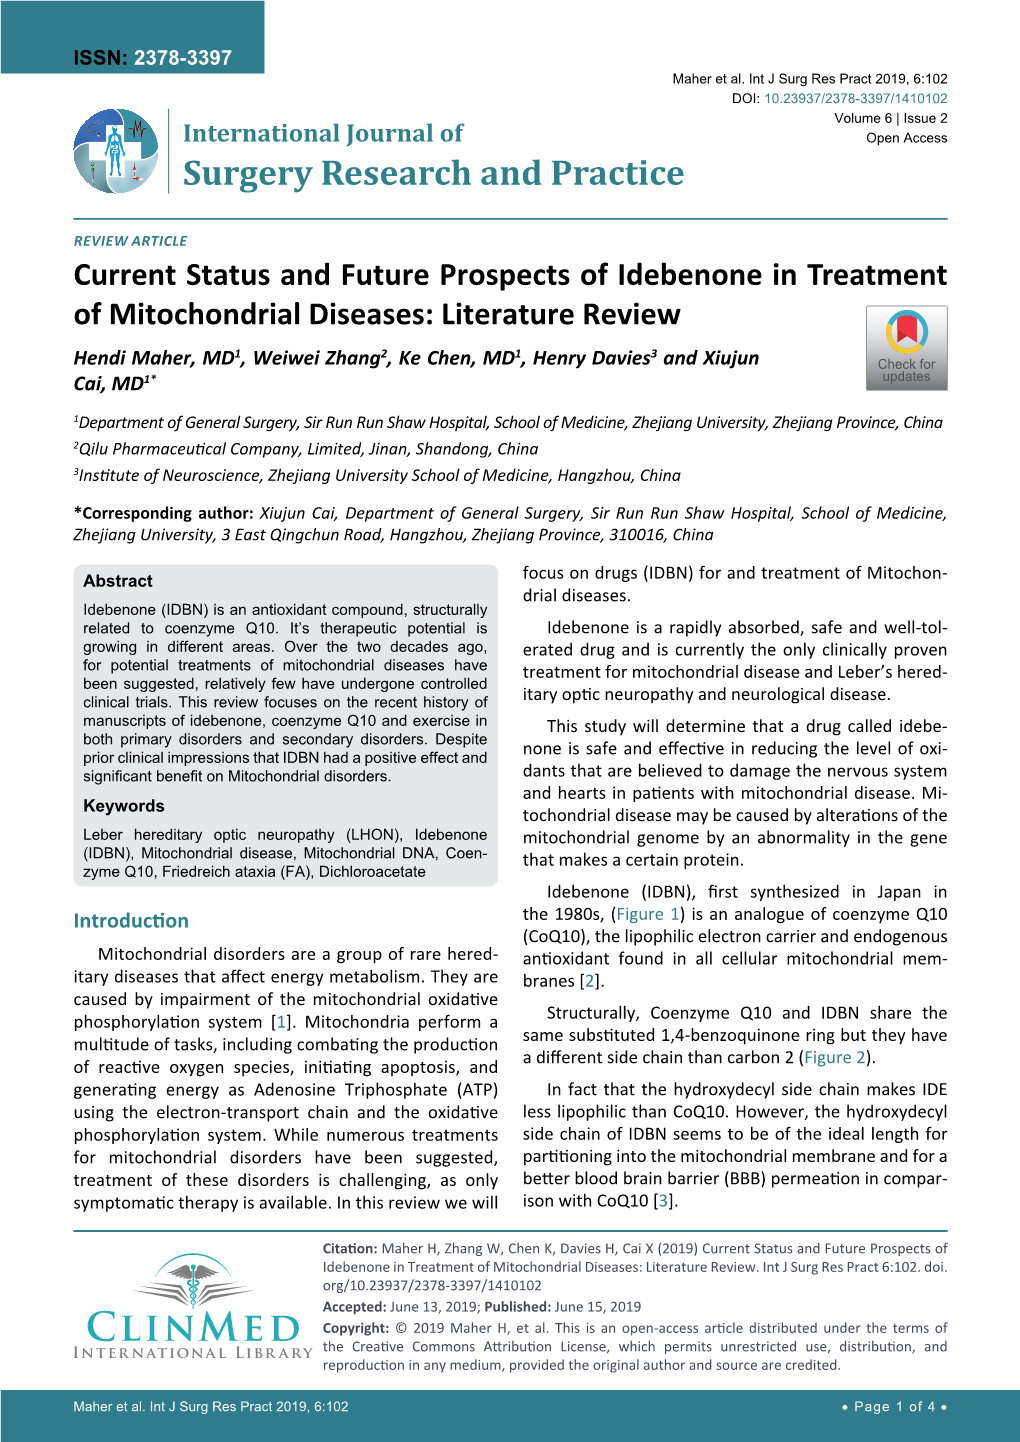 Current Status and Future Prospects of Idebenone in Treatment of Mitochondrial Diseases: Literature Review